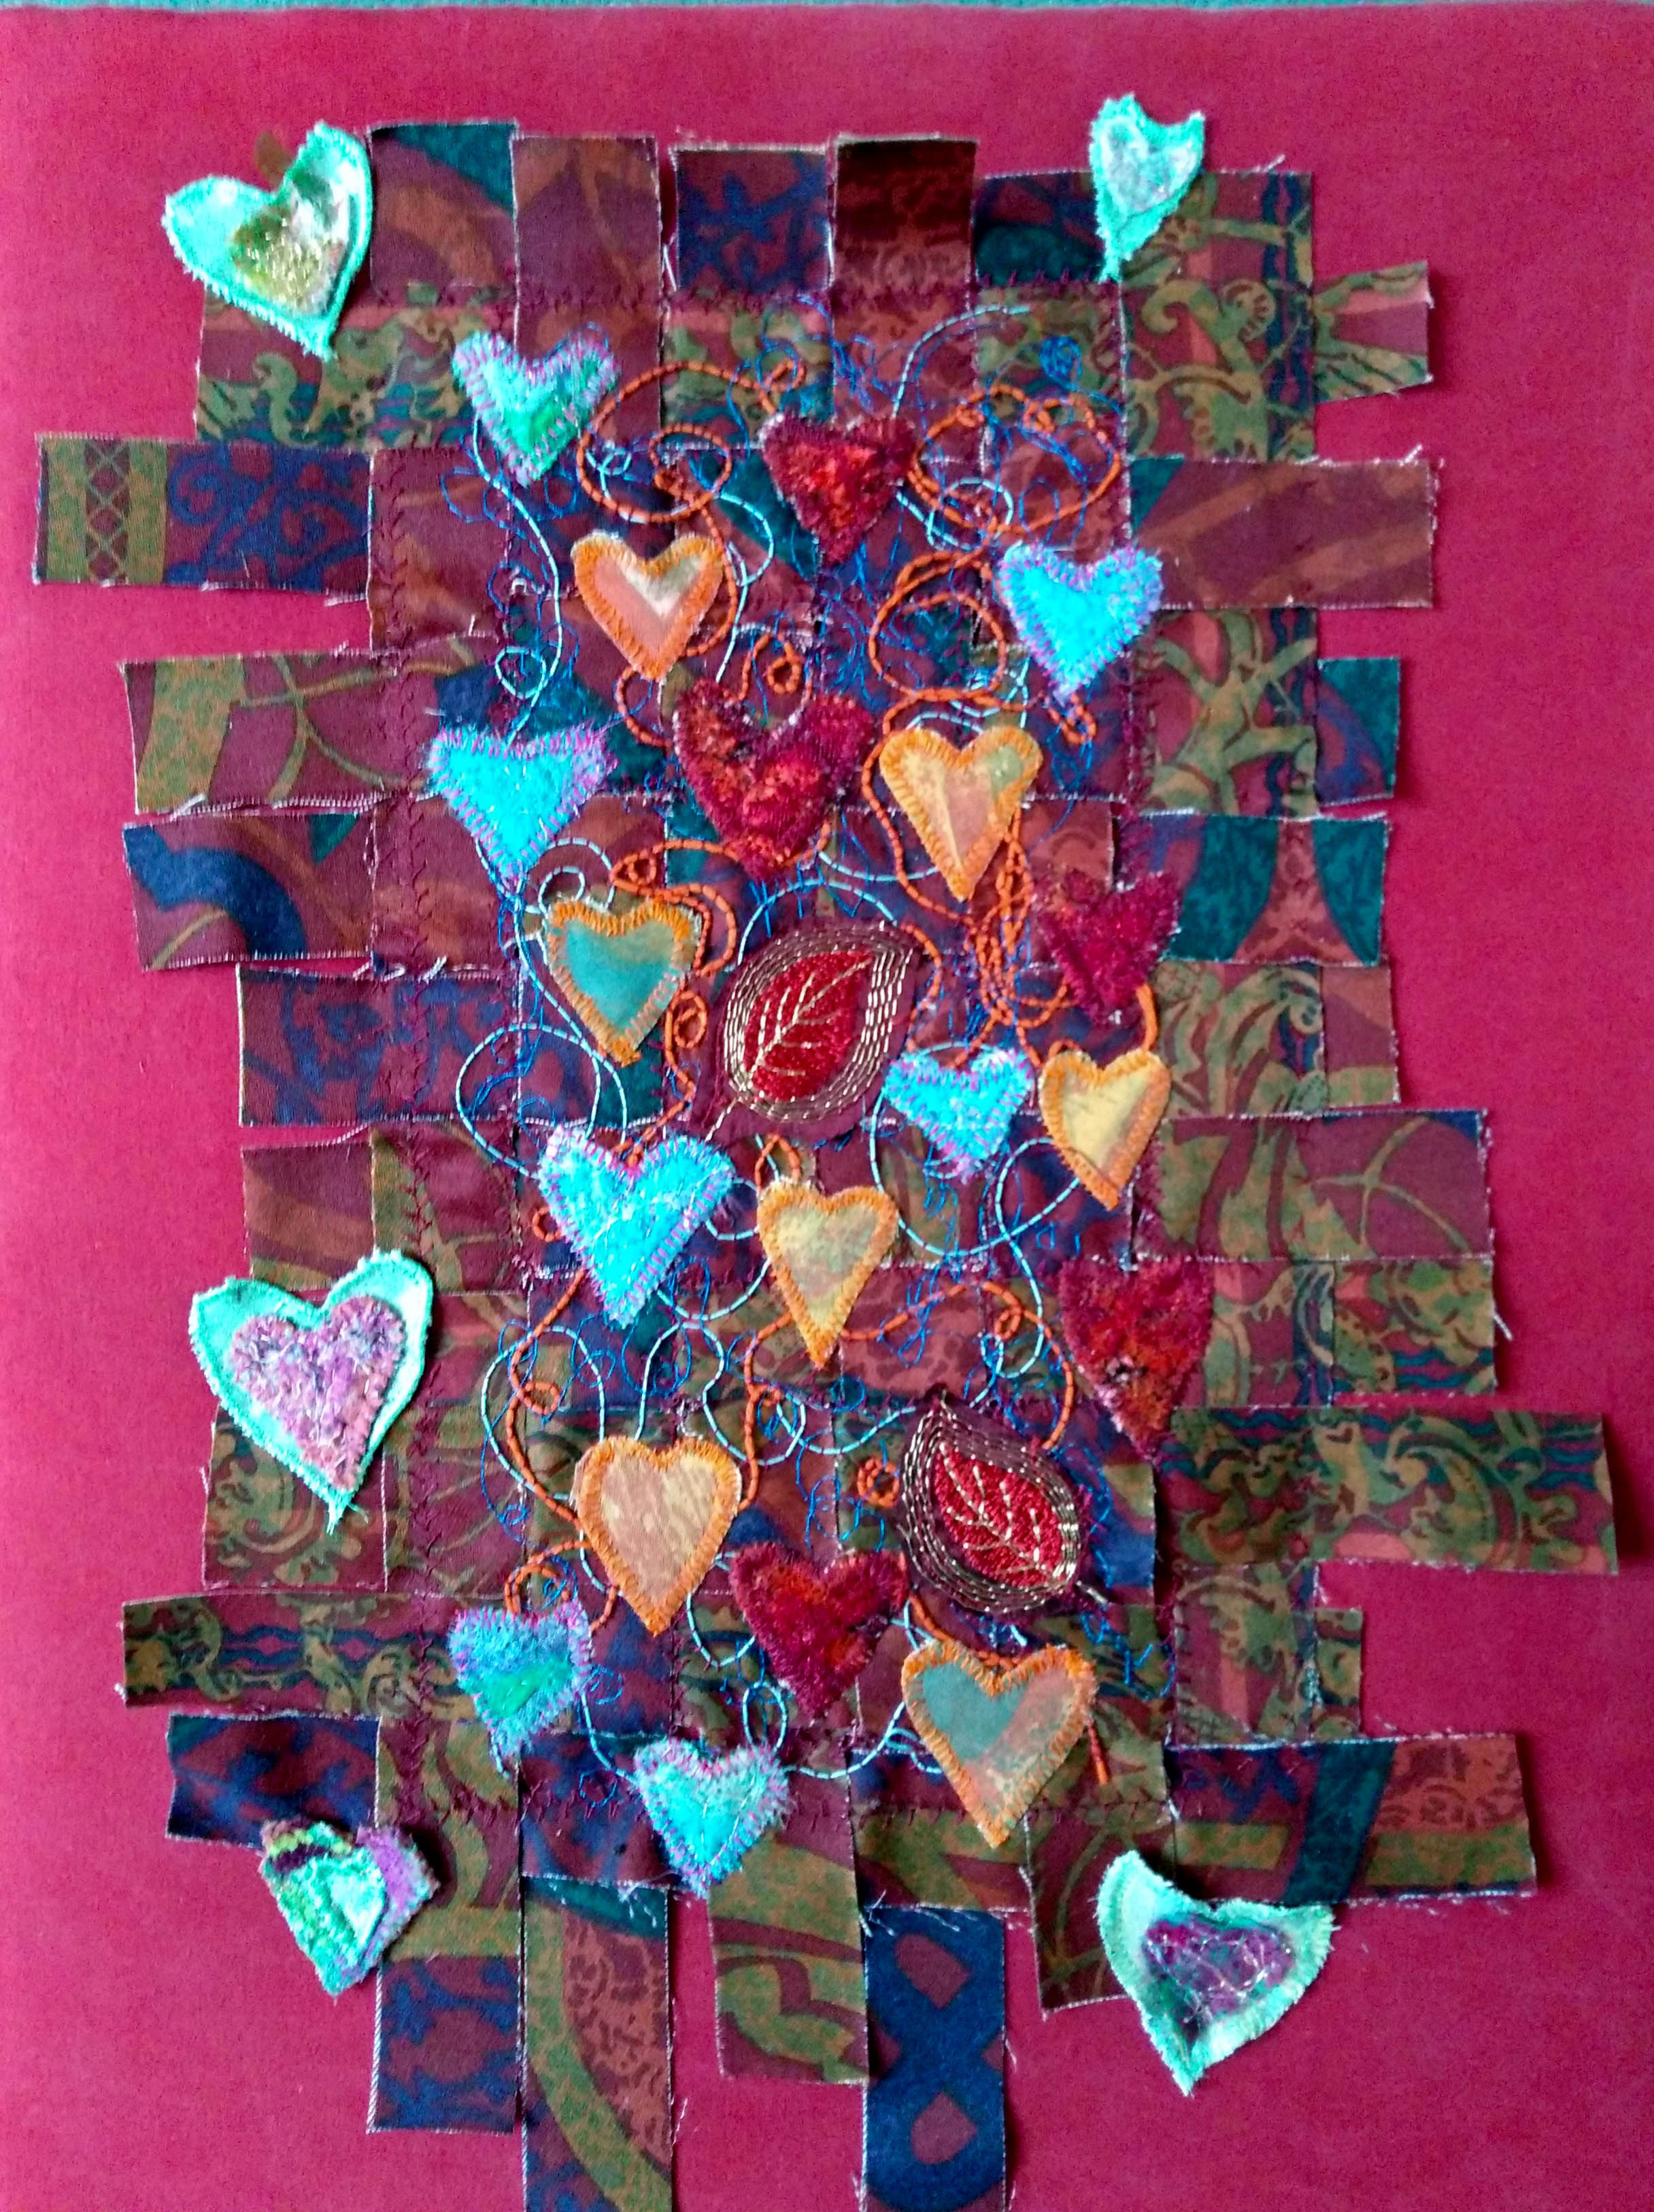 INTERWOVEN LOVE by Sheila Conchie, Glossop branch, woven strips of fabric, machined at random with added machine embroidery and applique hearts, Rose Bowl competition 2021